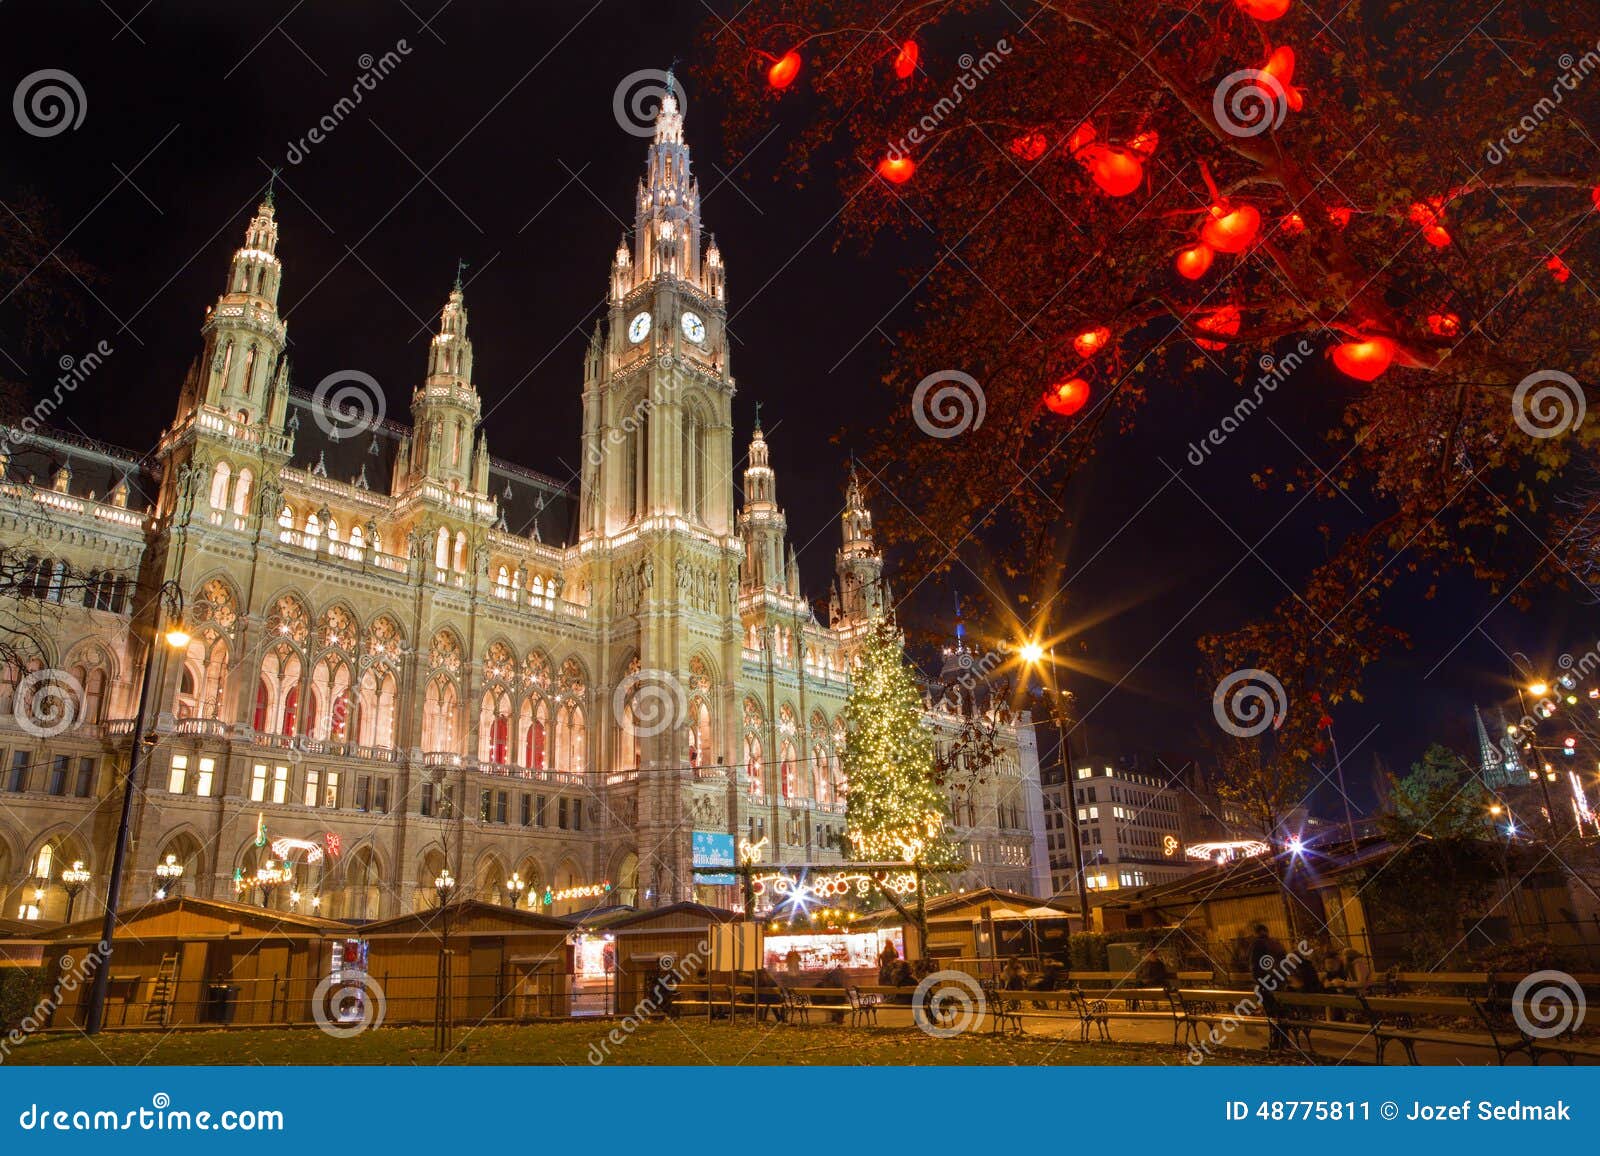  Vienna  Town hall And Christmas  Decoration  Stock Photo 